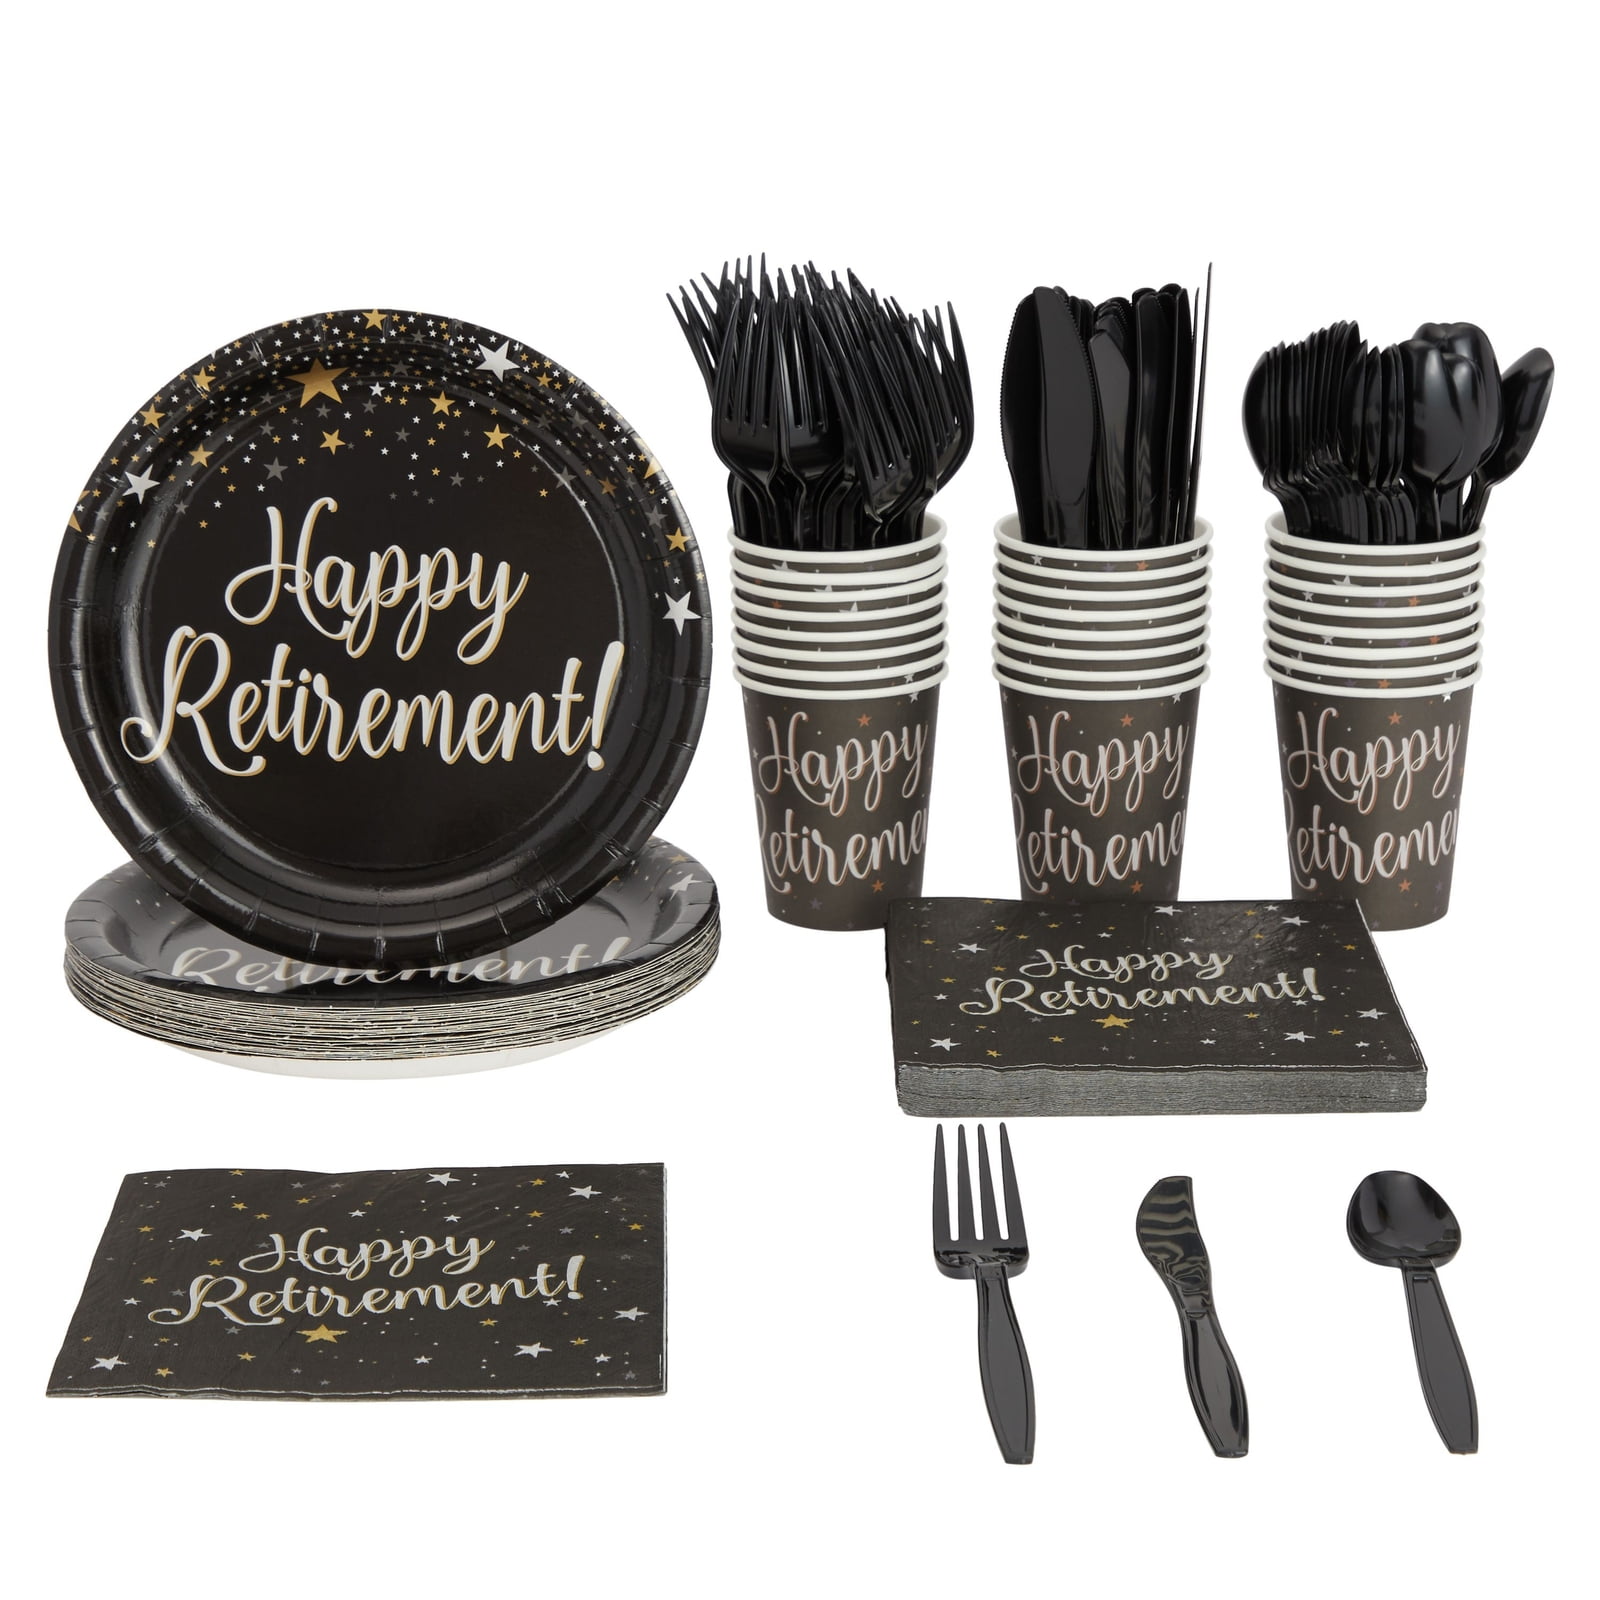 144 Piece Happy Retirement Party Supplies, Dinnerware Set with Cutlery, Plates, Napkins Cups, Serves 24